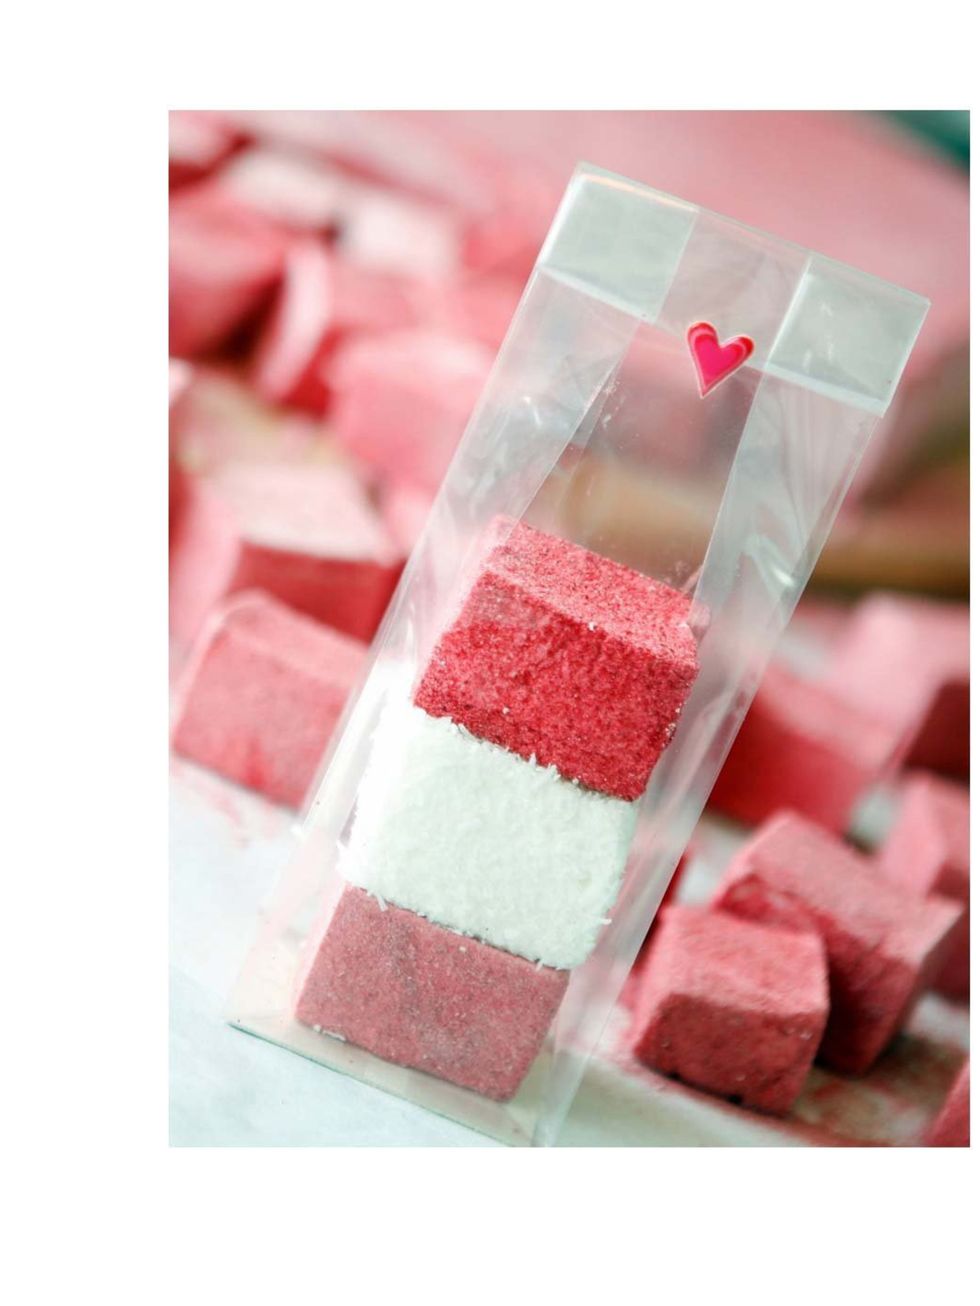 <p><a href="http://www.londonmarshmallows.co.uk/">Gourmet Marshmallows</a></p><p>Posh marshmallows are the new cupcakes dontcha know. We got an inkling when we were sent a selection of fancy treats from gin to balckcurrent to chilli and mint flavour. All 